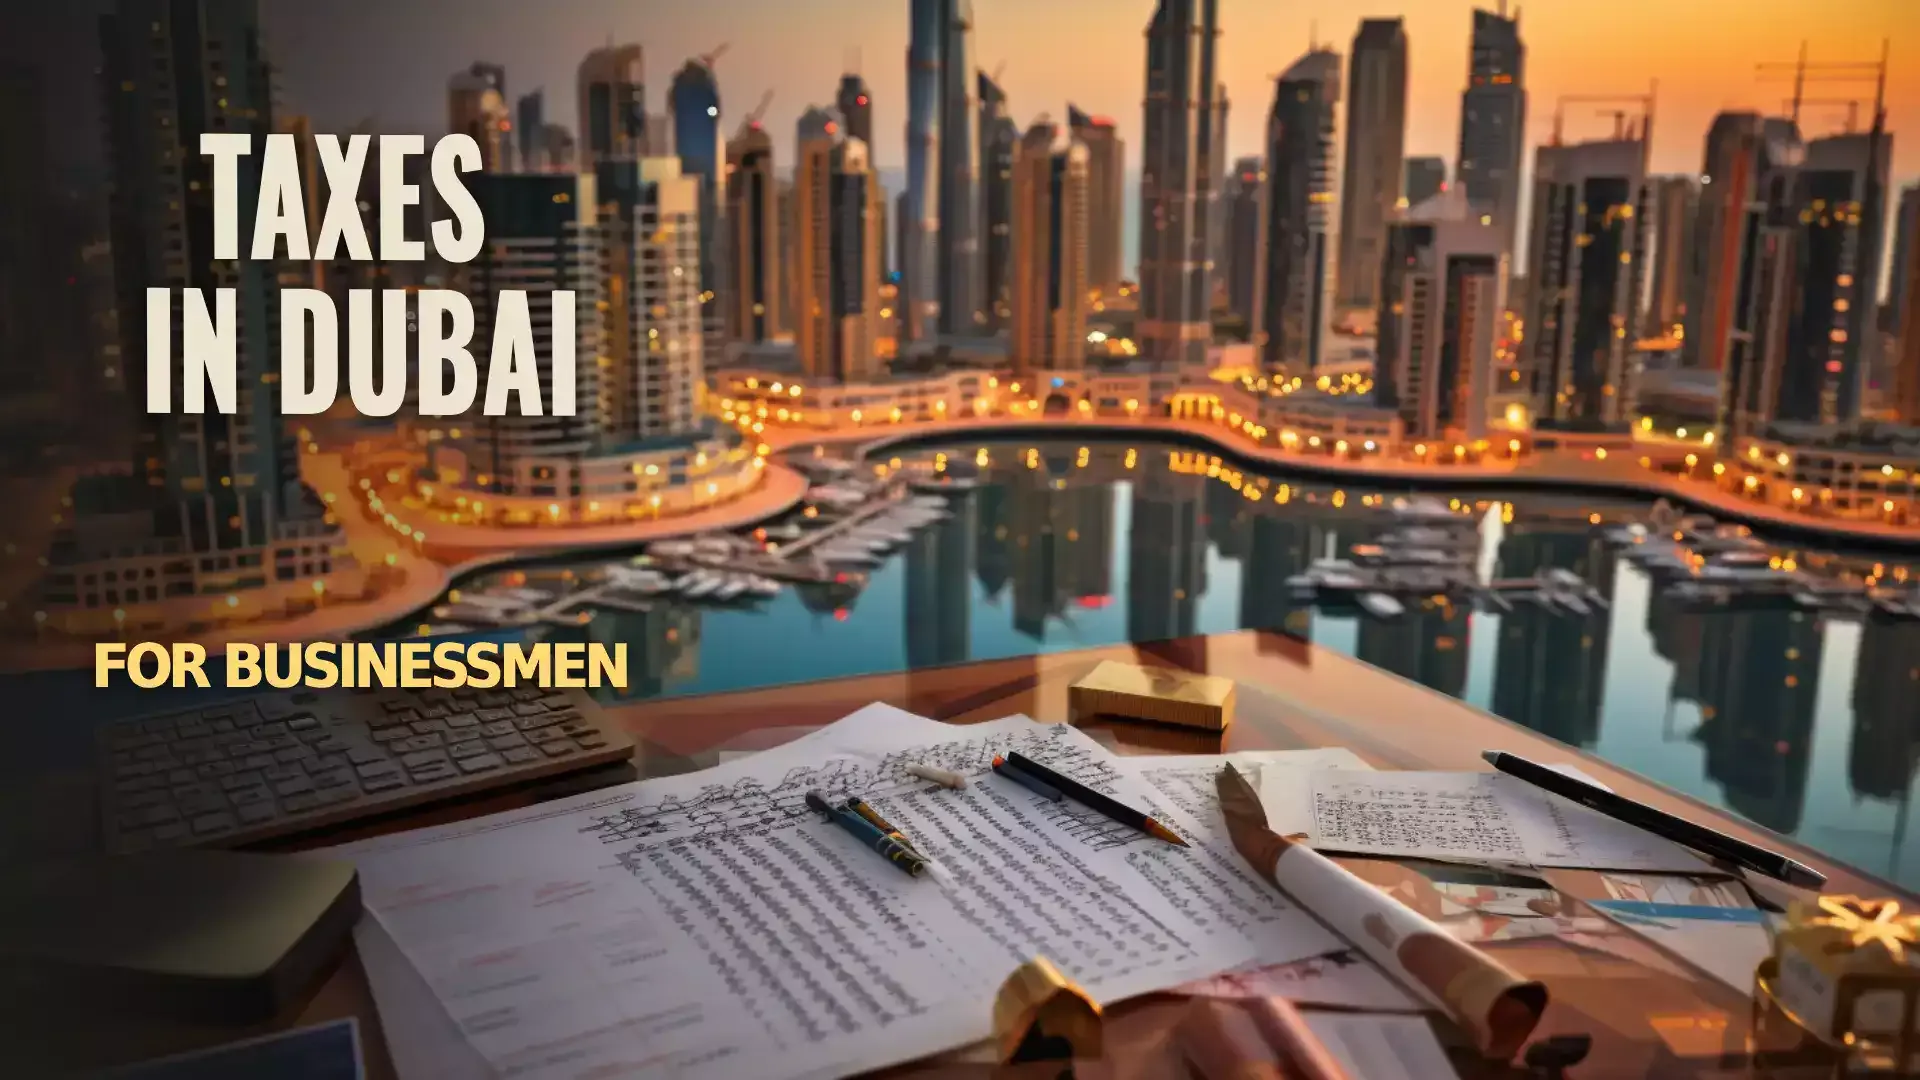 Image depicting the intricacies and regulations of taxes in Dubai